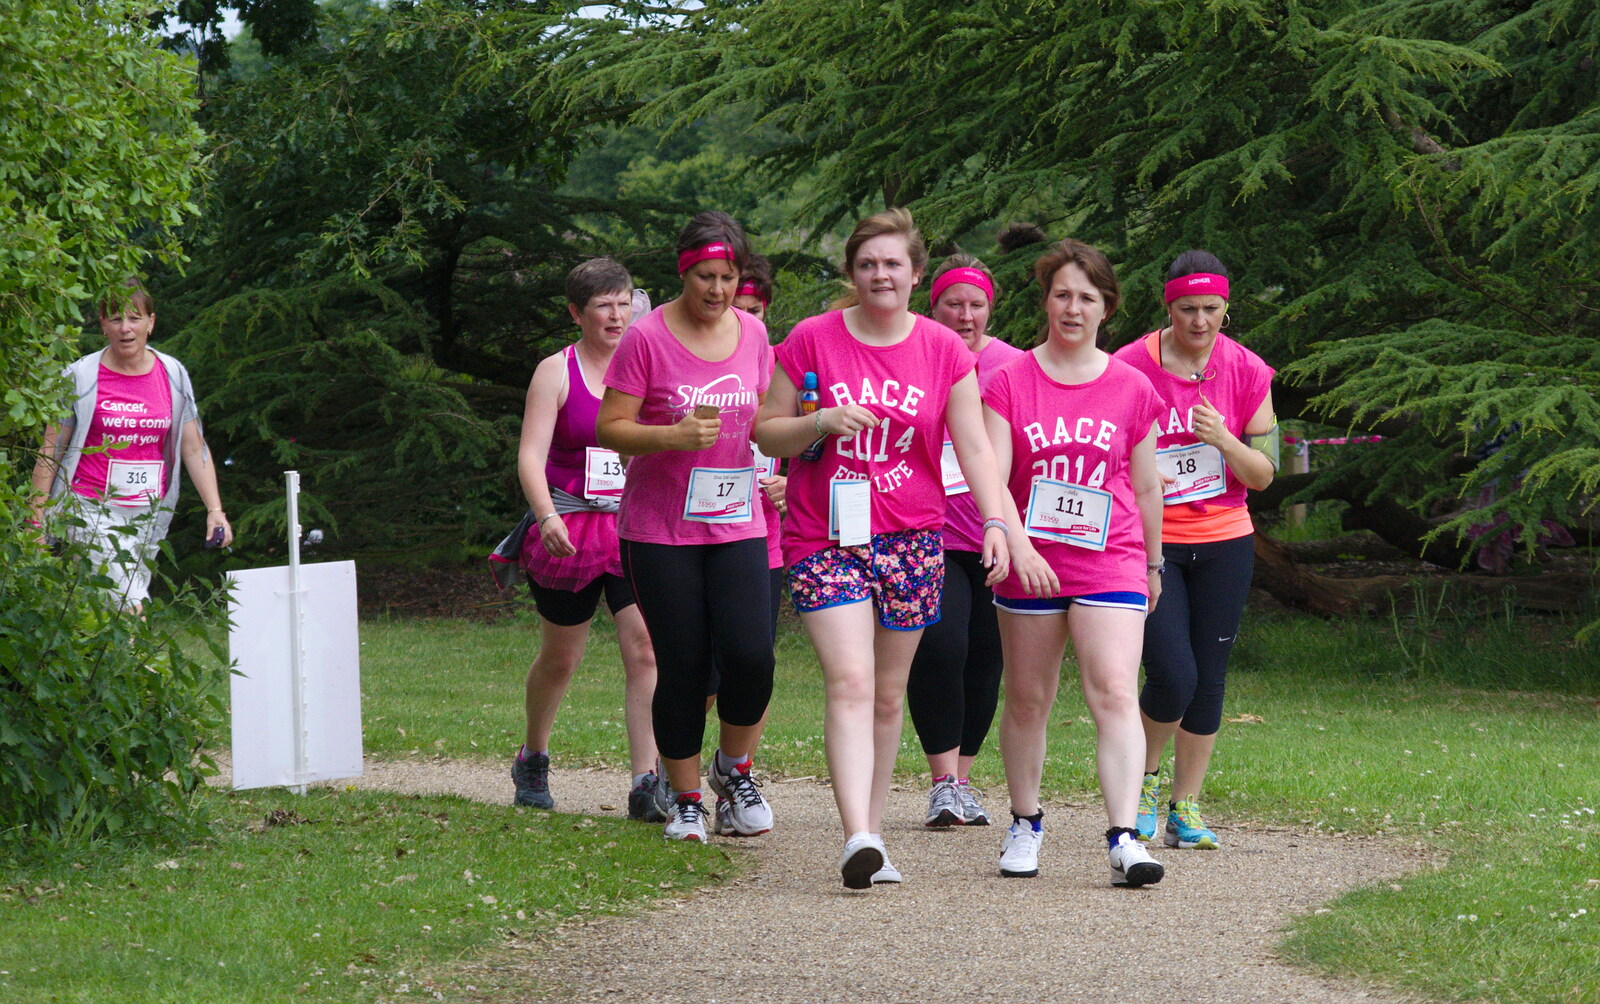 A gang ofwalkers from Isobel's Race For Life, Chantry Park, Ipswich - 11th June 2014